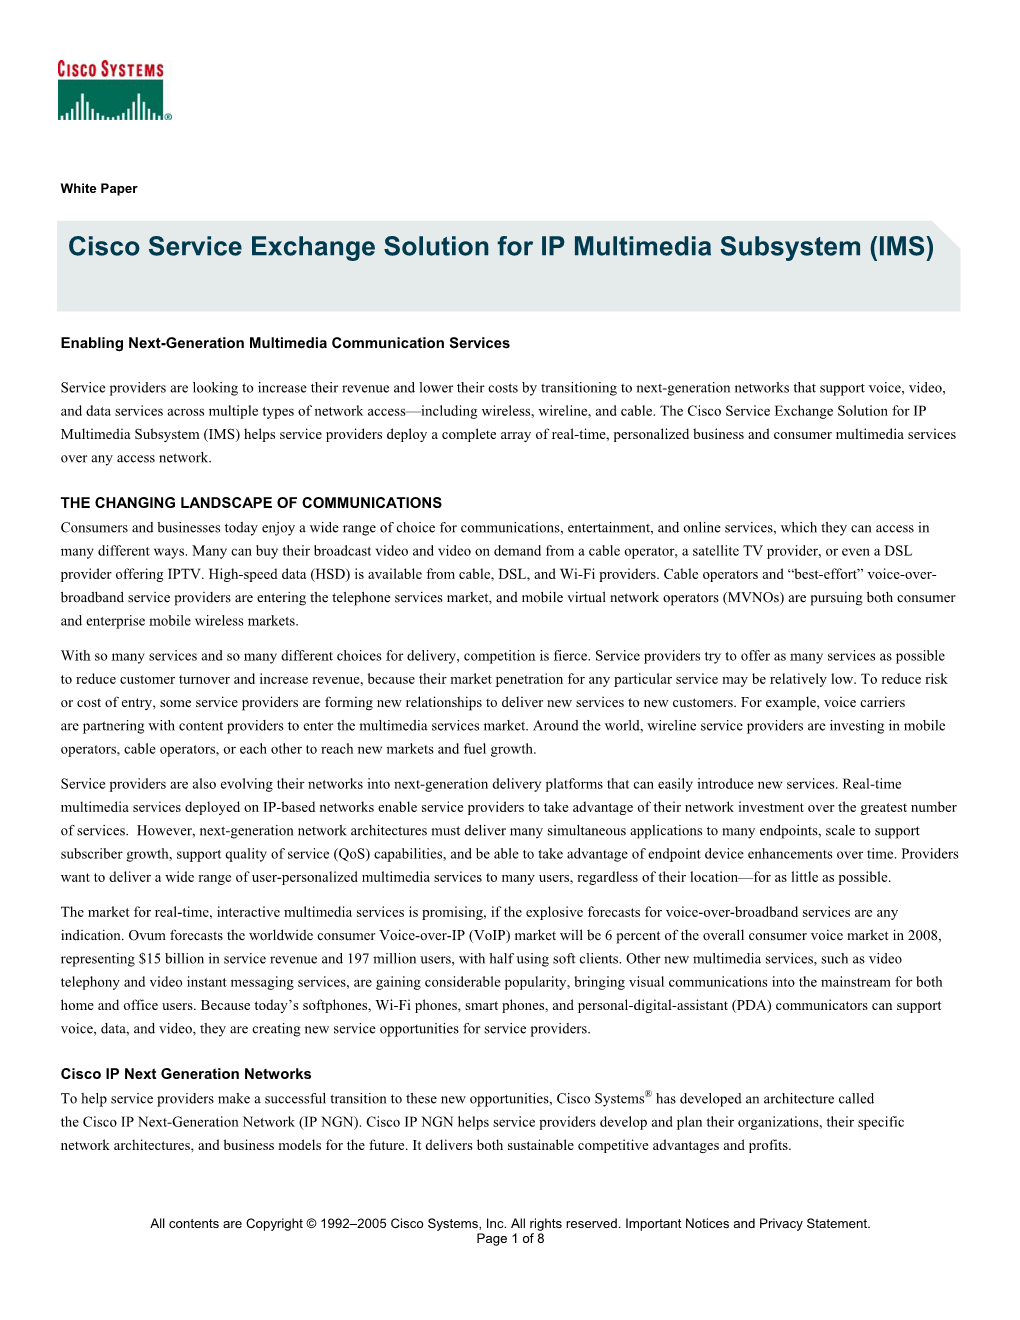 Cisco Service Exchange Solution for IP Multimedia Subsystem (IMS)